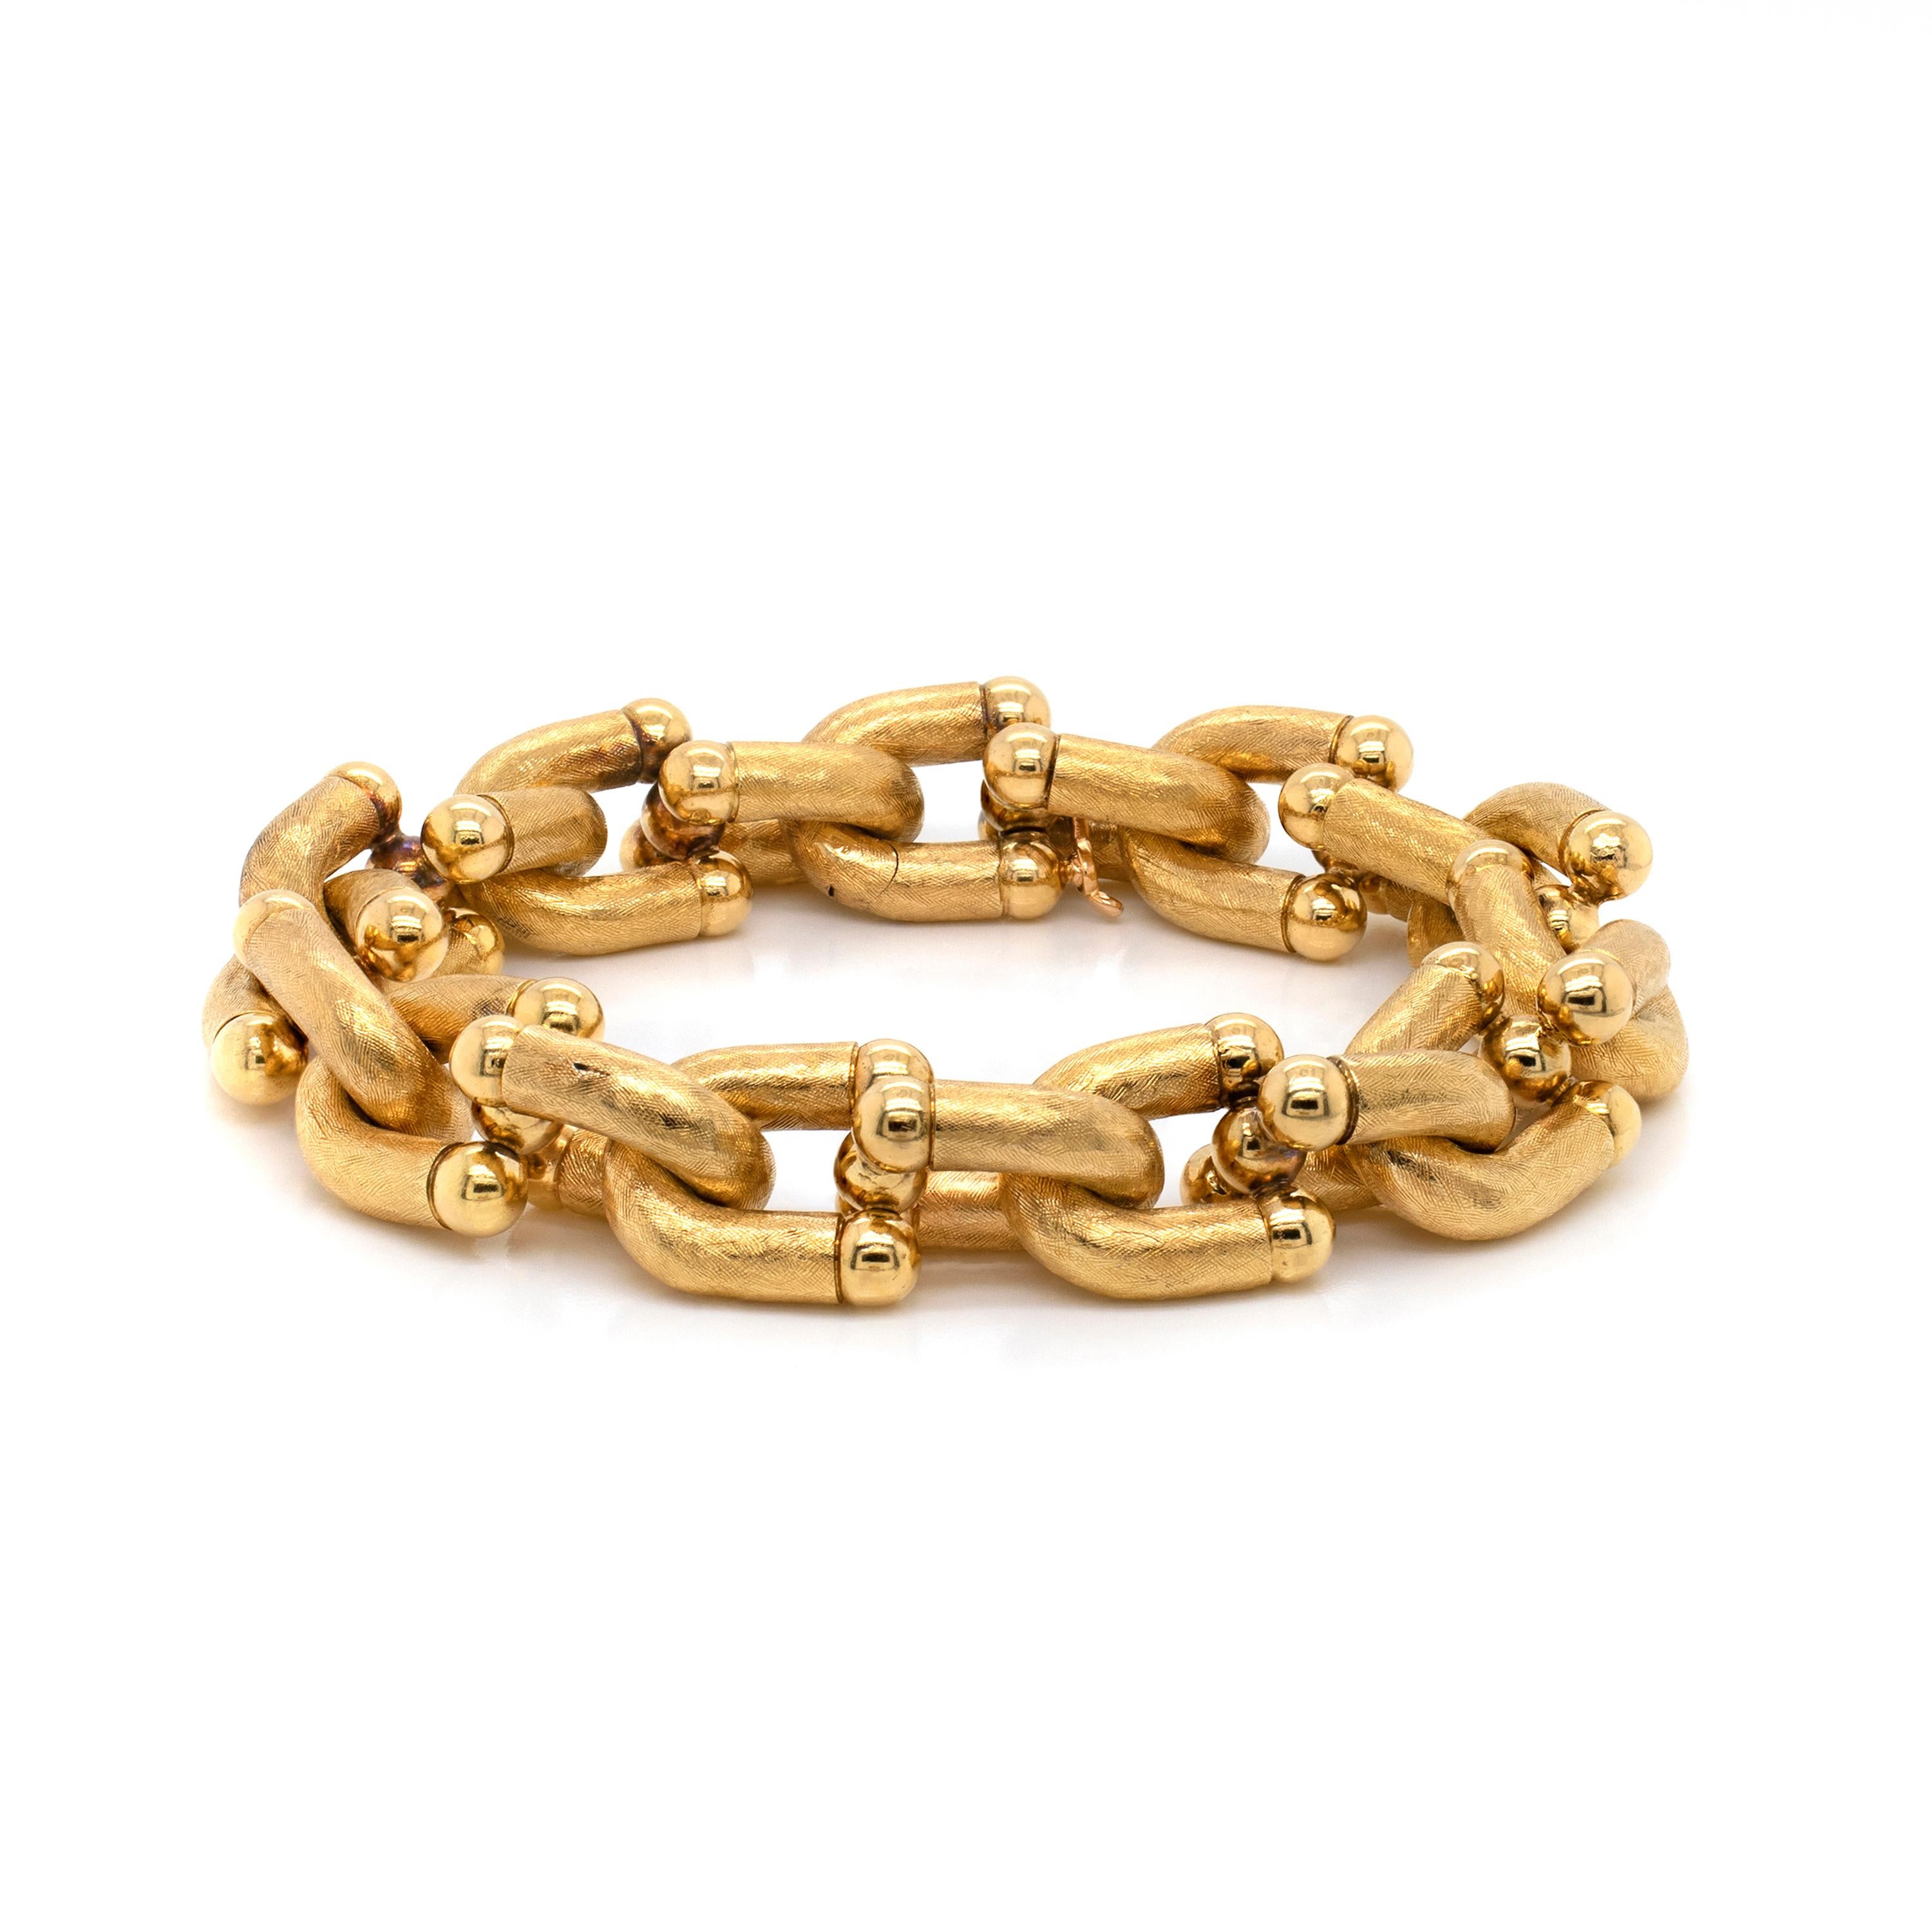 This gorgeous Georges L'Enfant vintage hardware textured link bracelet has been crafted in 18 carat yellow gold. The piece consists of 20 'U' shaped links all hand finished with an etched texture giving the bracelet a wonderful sheen.  The bracelet